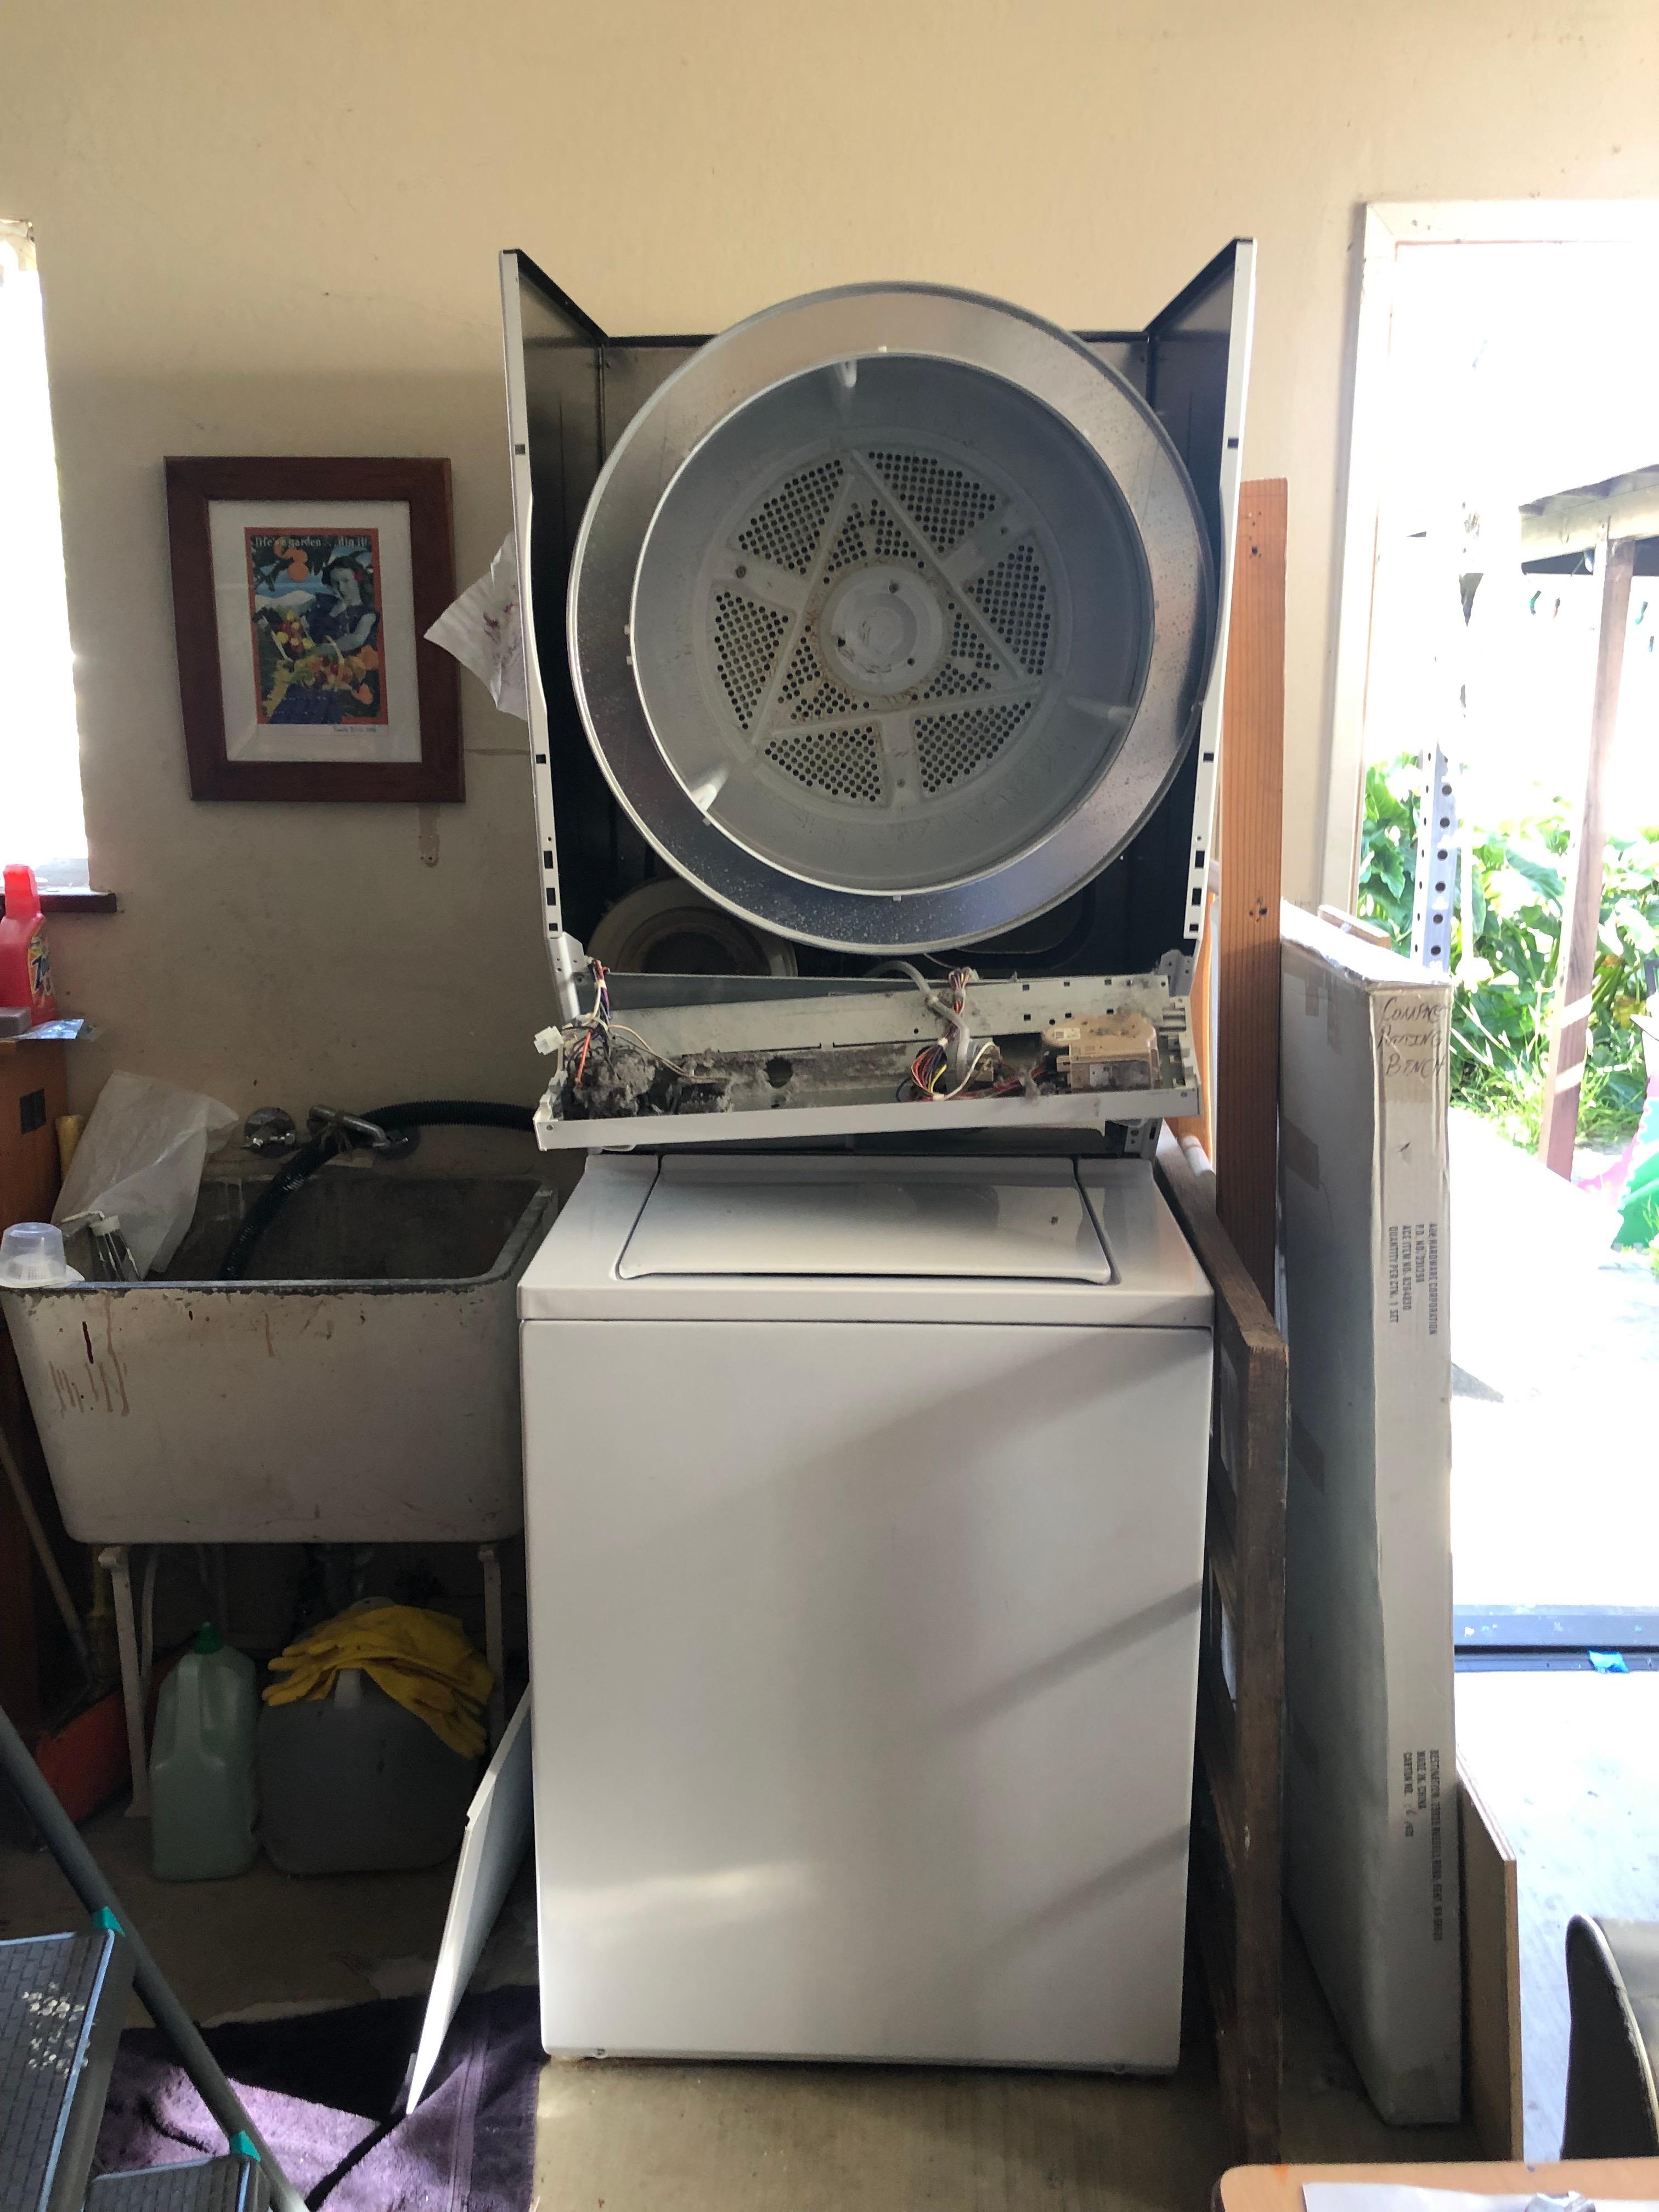 Picture of FixEm Appliance Repair fixed this washer/dryer combo. - FixEm Appliance Repair